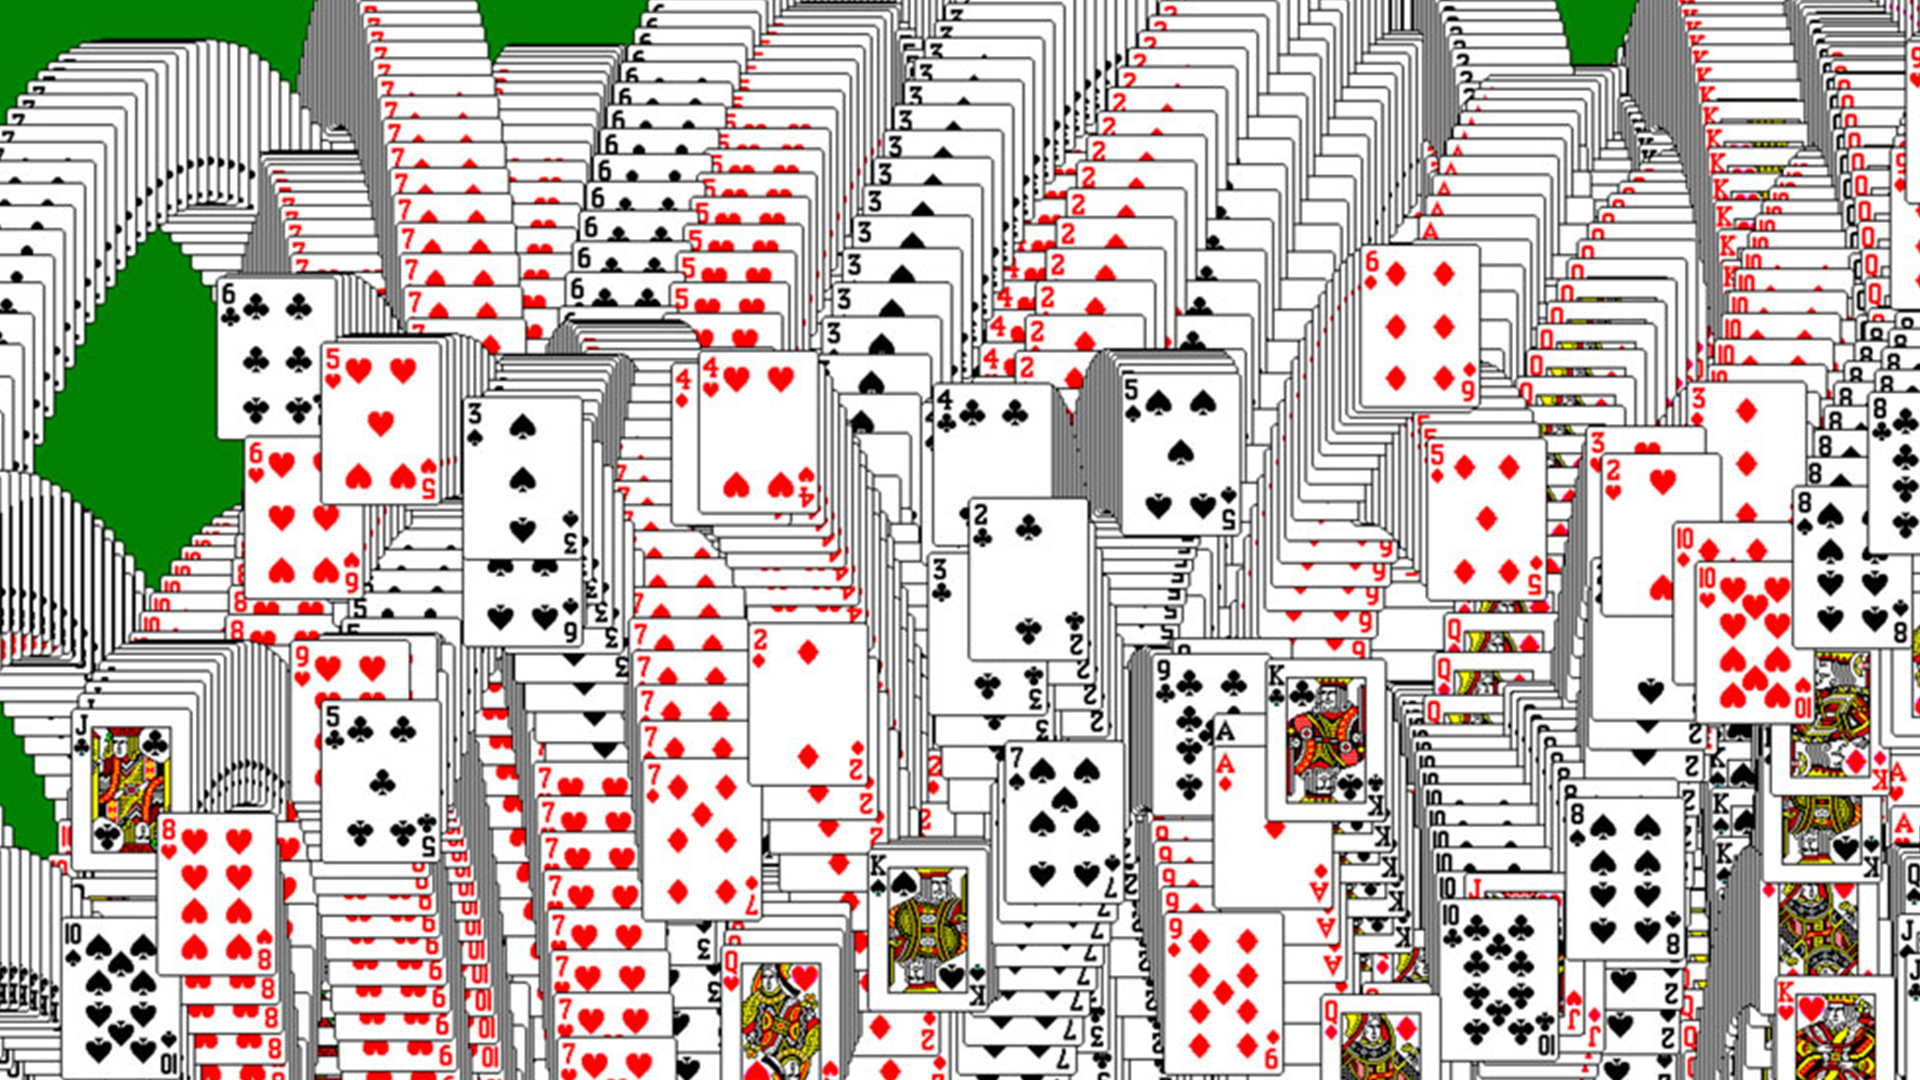 72yearold solitaire player completes 50,000 games with only 15 losses